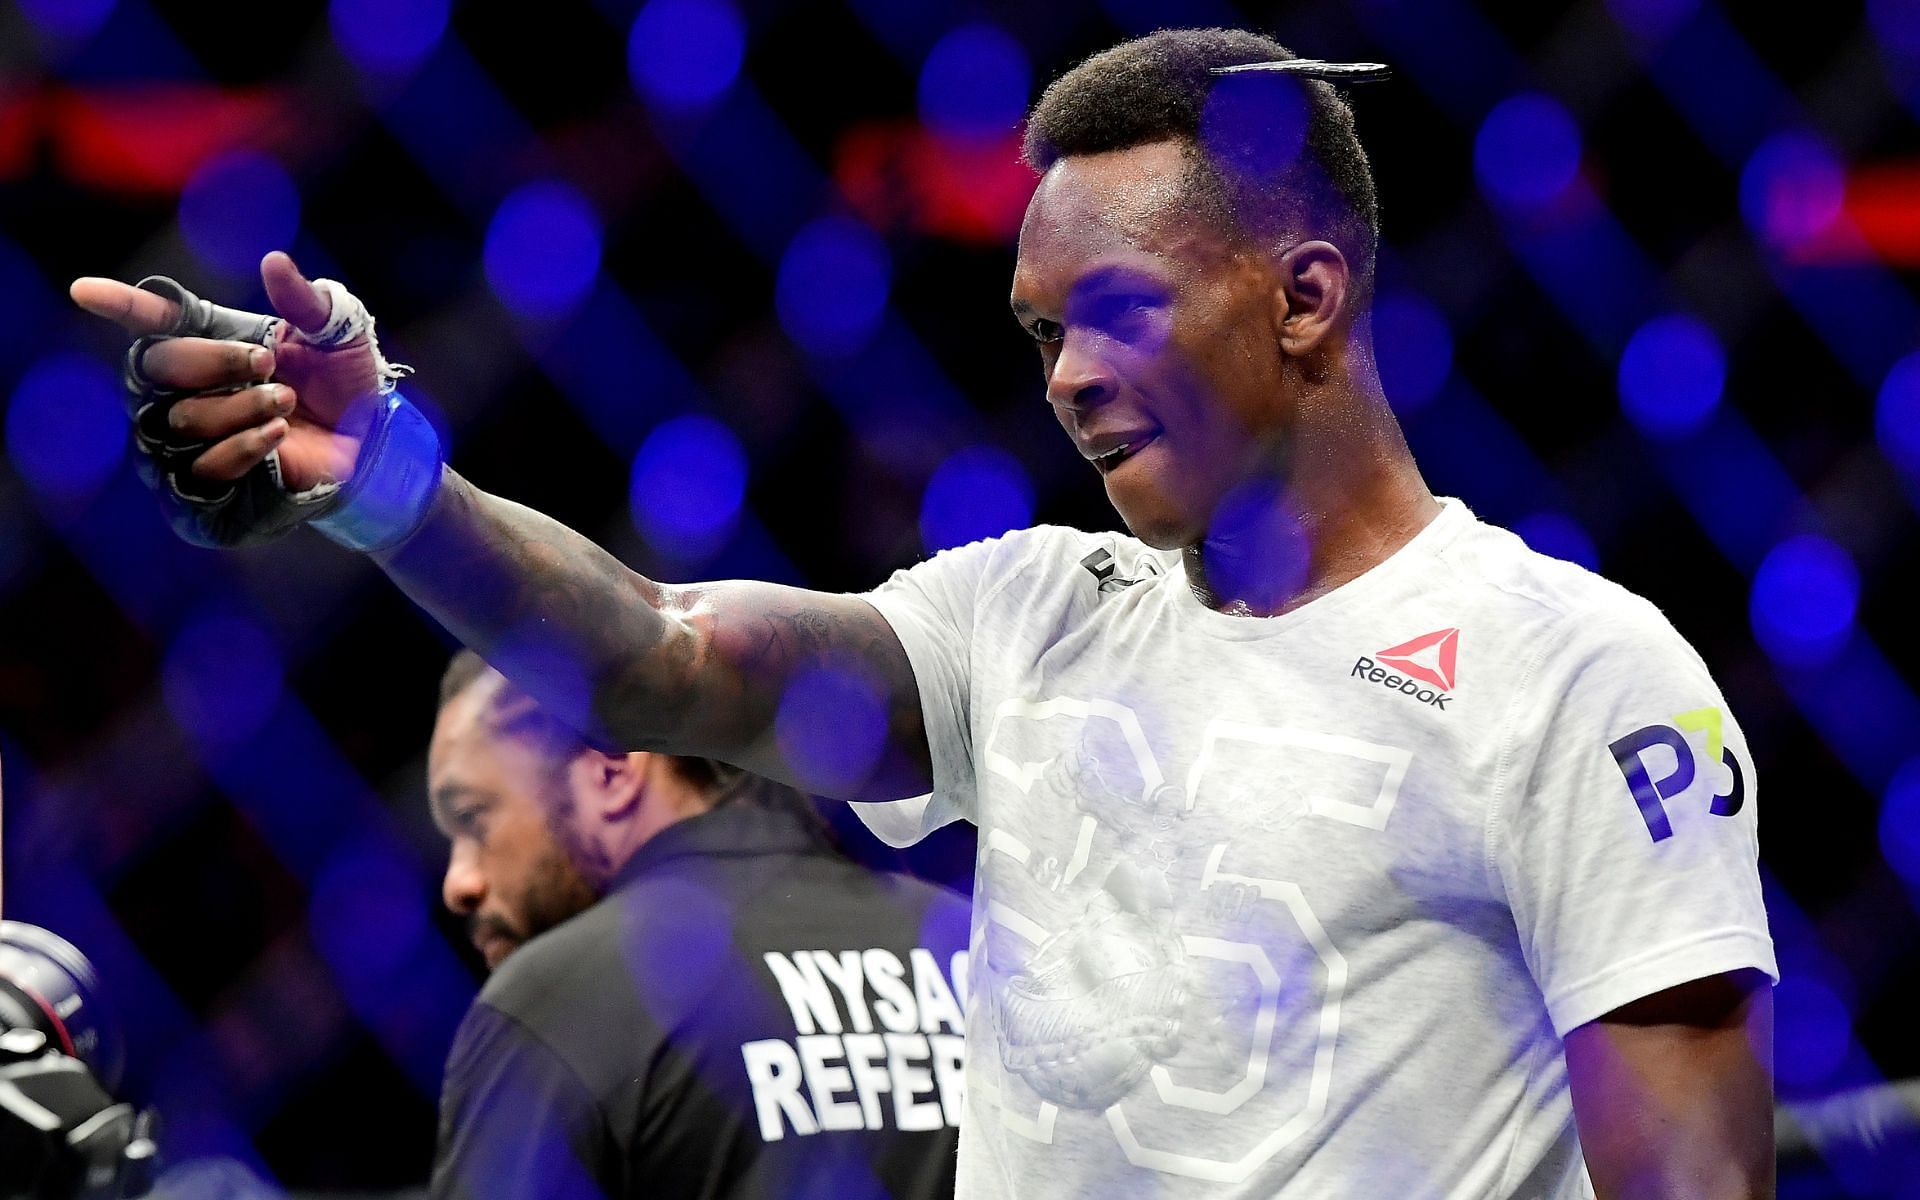 Israel Adesanya has competed in the sports of boxing, kickboxing, and MMA